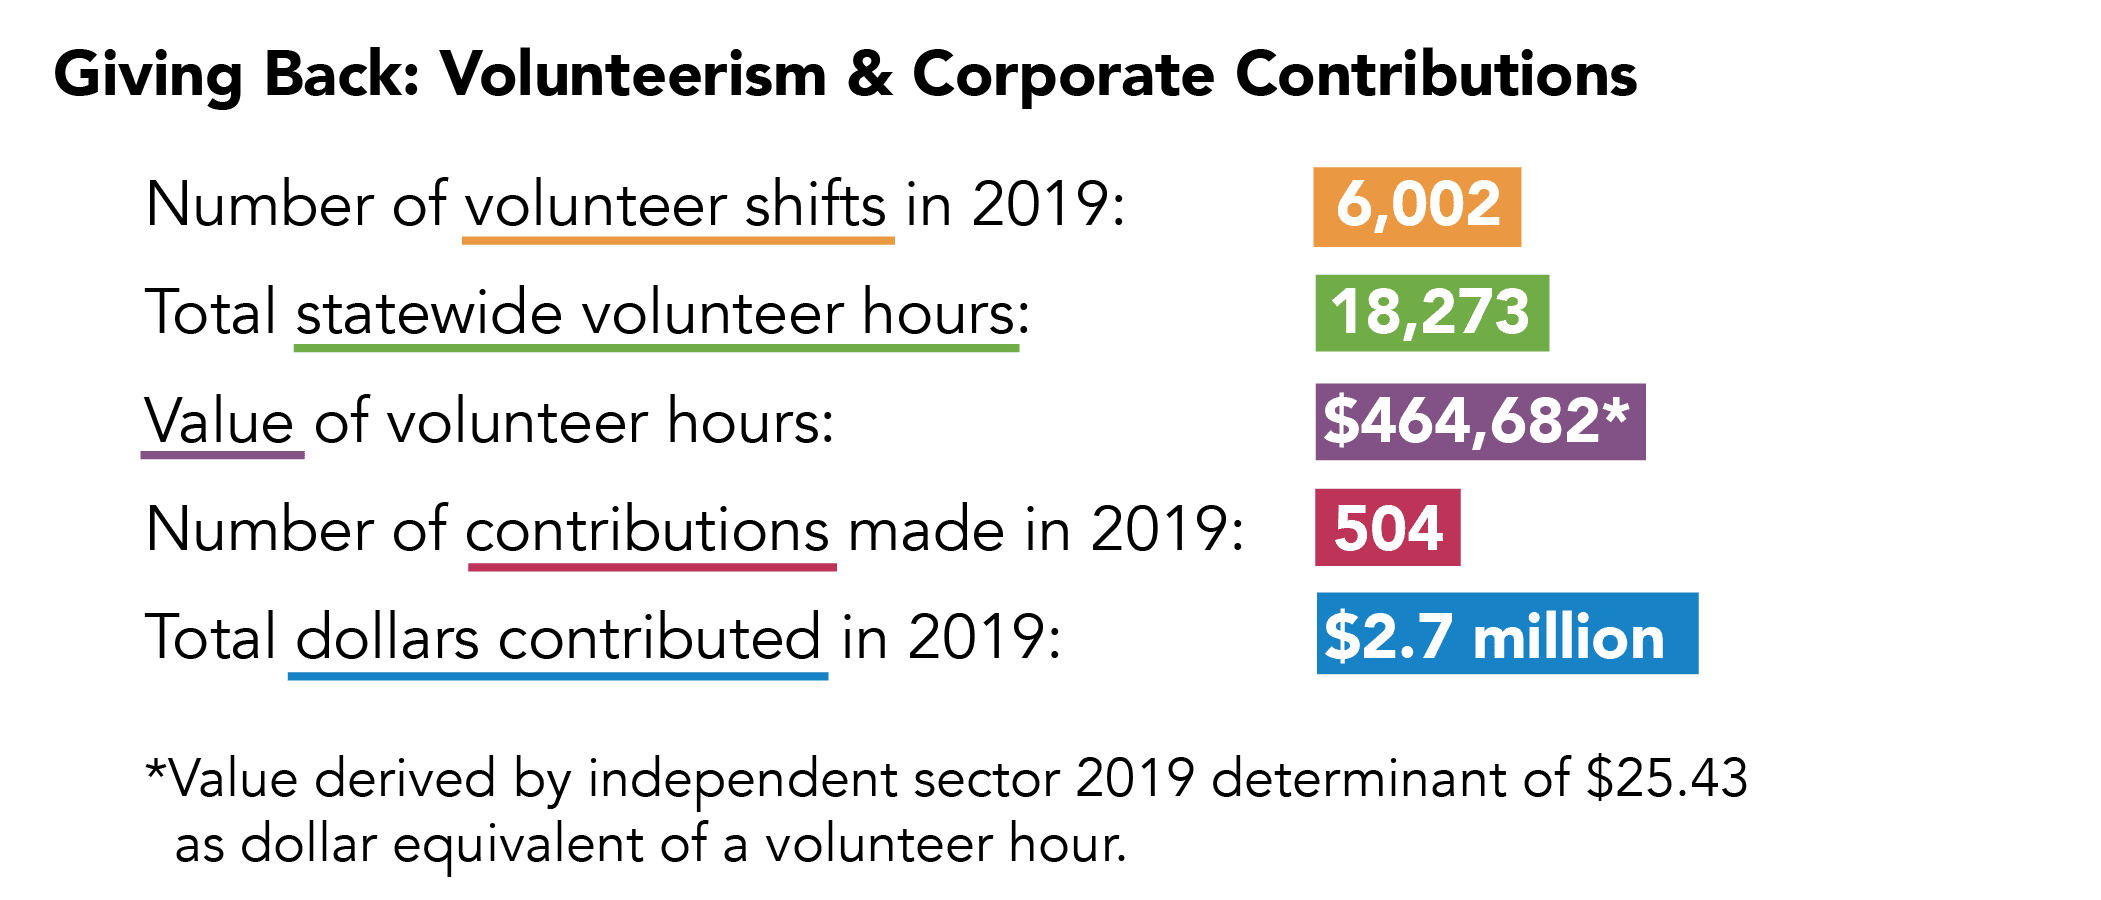 Graphic: Giving Back: Volunteerism & Corporate Contributions; Text: • Number of volunteer shifts in 2019: 6,002 • Total statewide volunteer hours: 18,273 • Value of volunteer hours: $464,682* • Number of contributions made in 2019: 504 • Total dollars contributed in 2019: $2.7 million *Value derived by independent sector 2019 determinant of $25.43 as dollar equivalent of a volunteer hour.